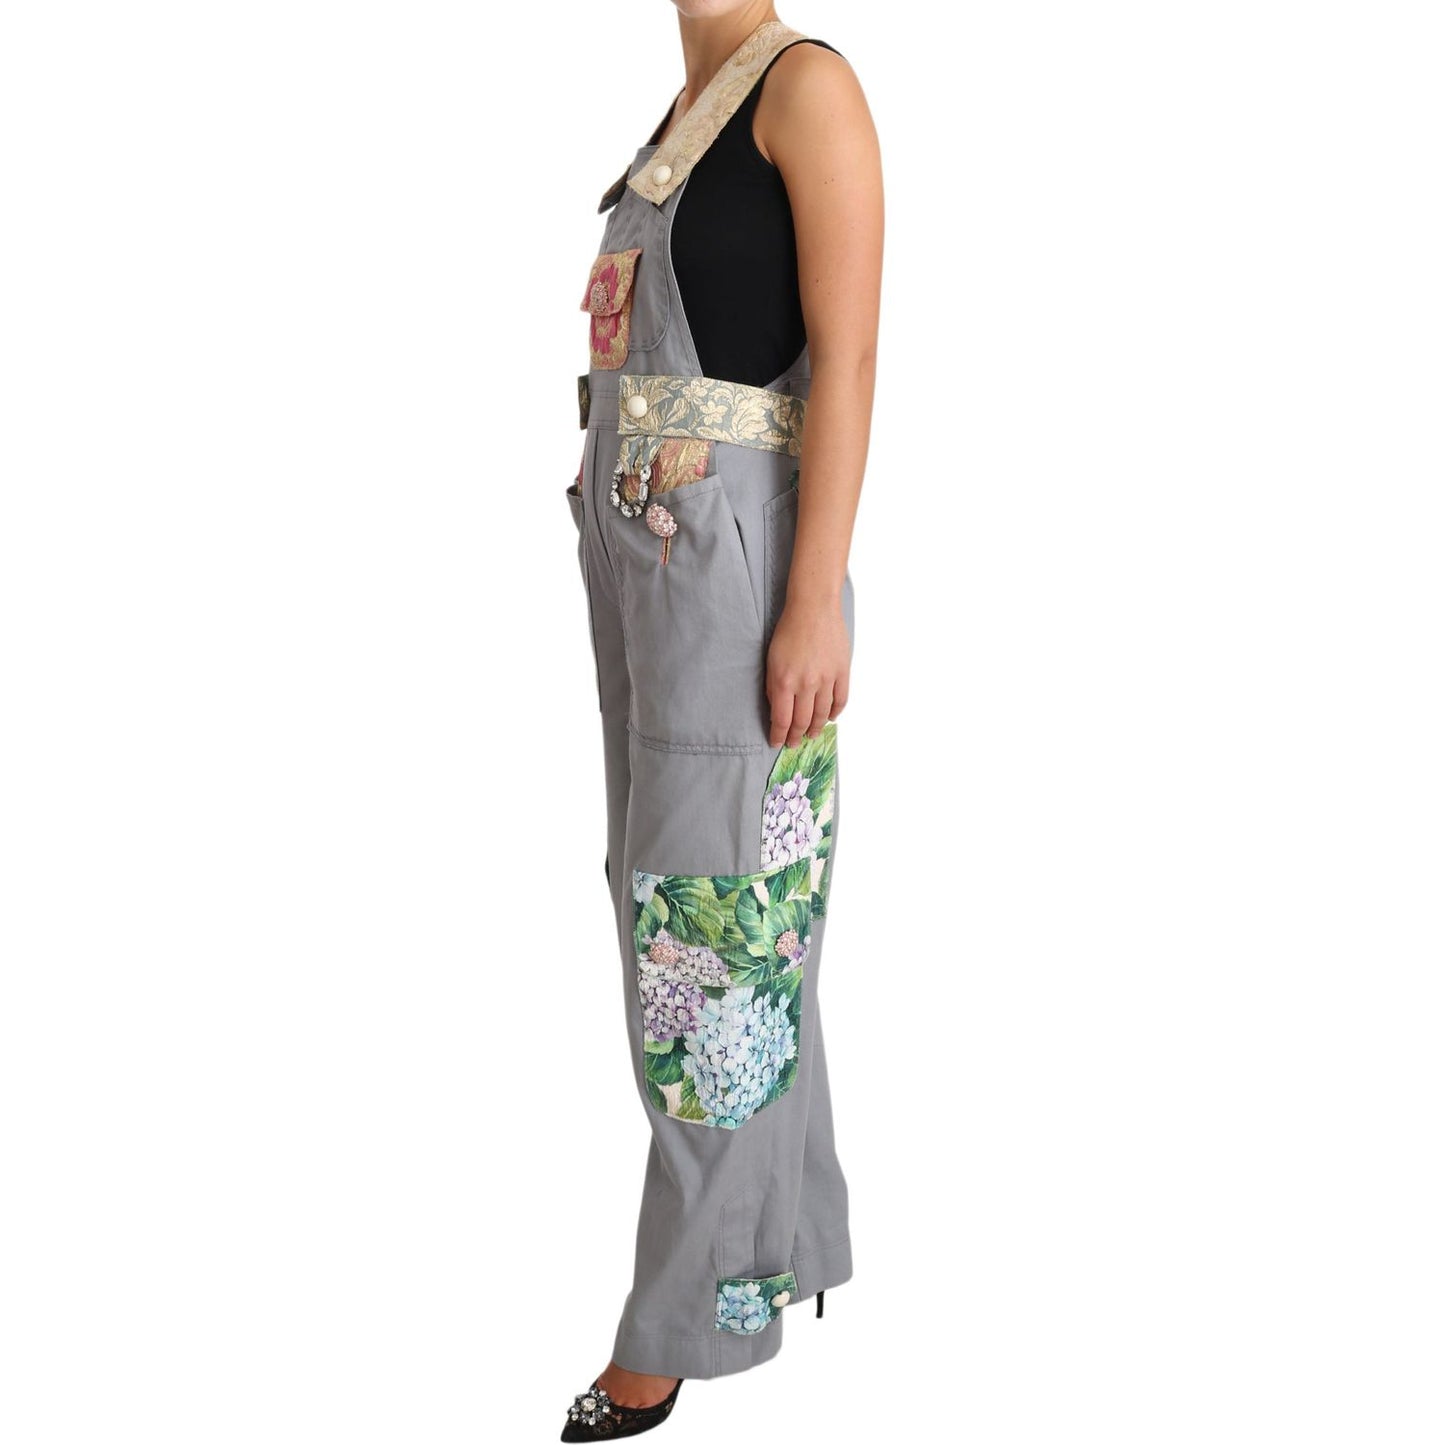 Dolce & Gabbana Exquisite Floral Embellished Denim Overalls gray-overall-jeans-gray-denim-crystal-hortensia